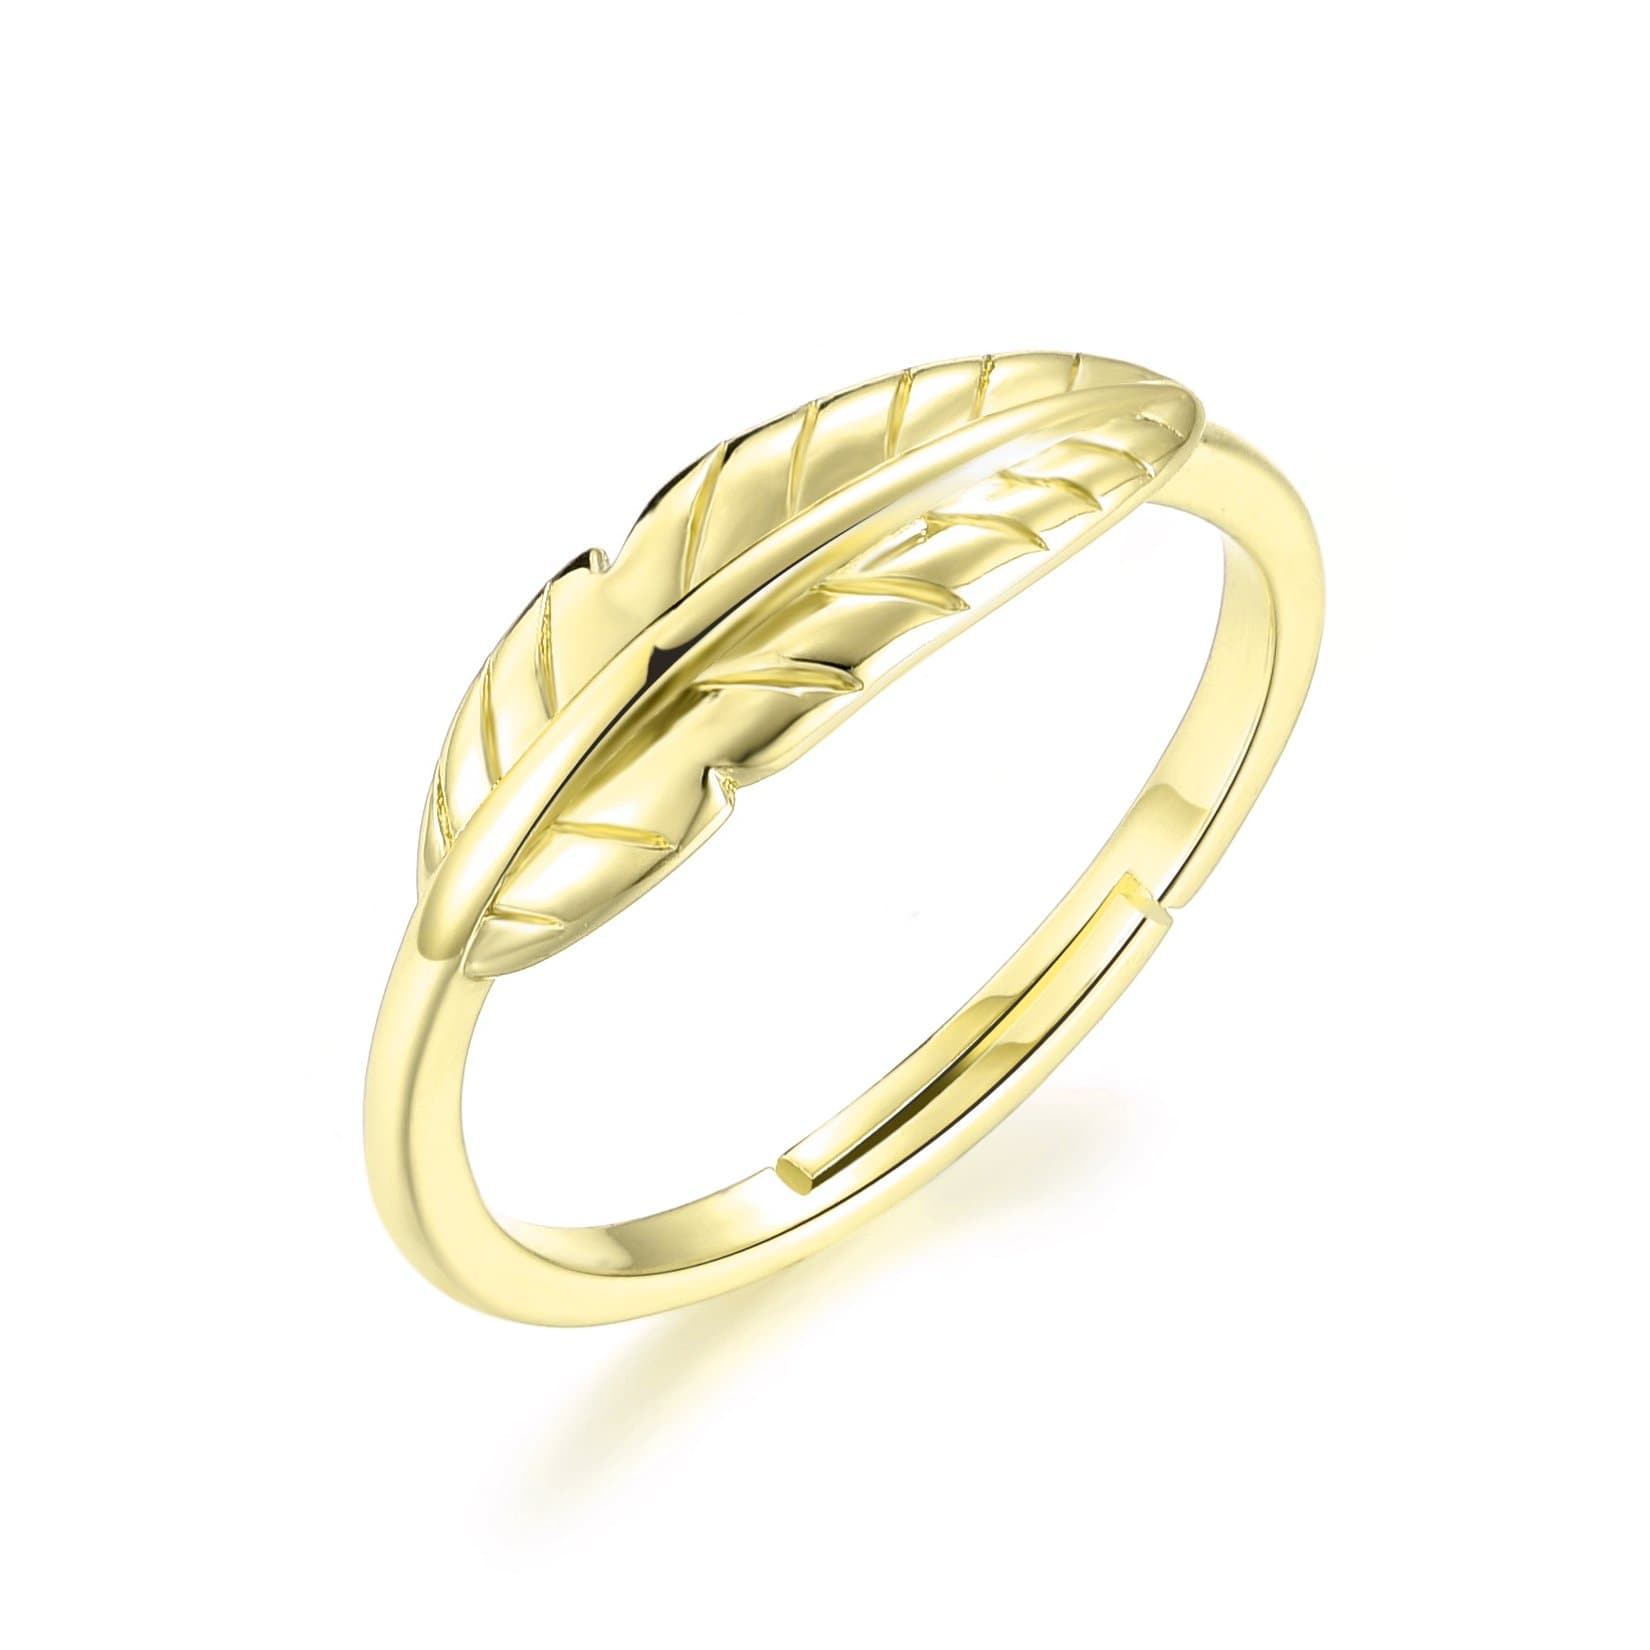 Gold Plated Adjustable Feather Ring by Philip Jones Jewellery